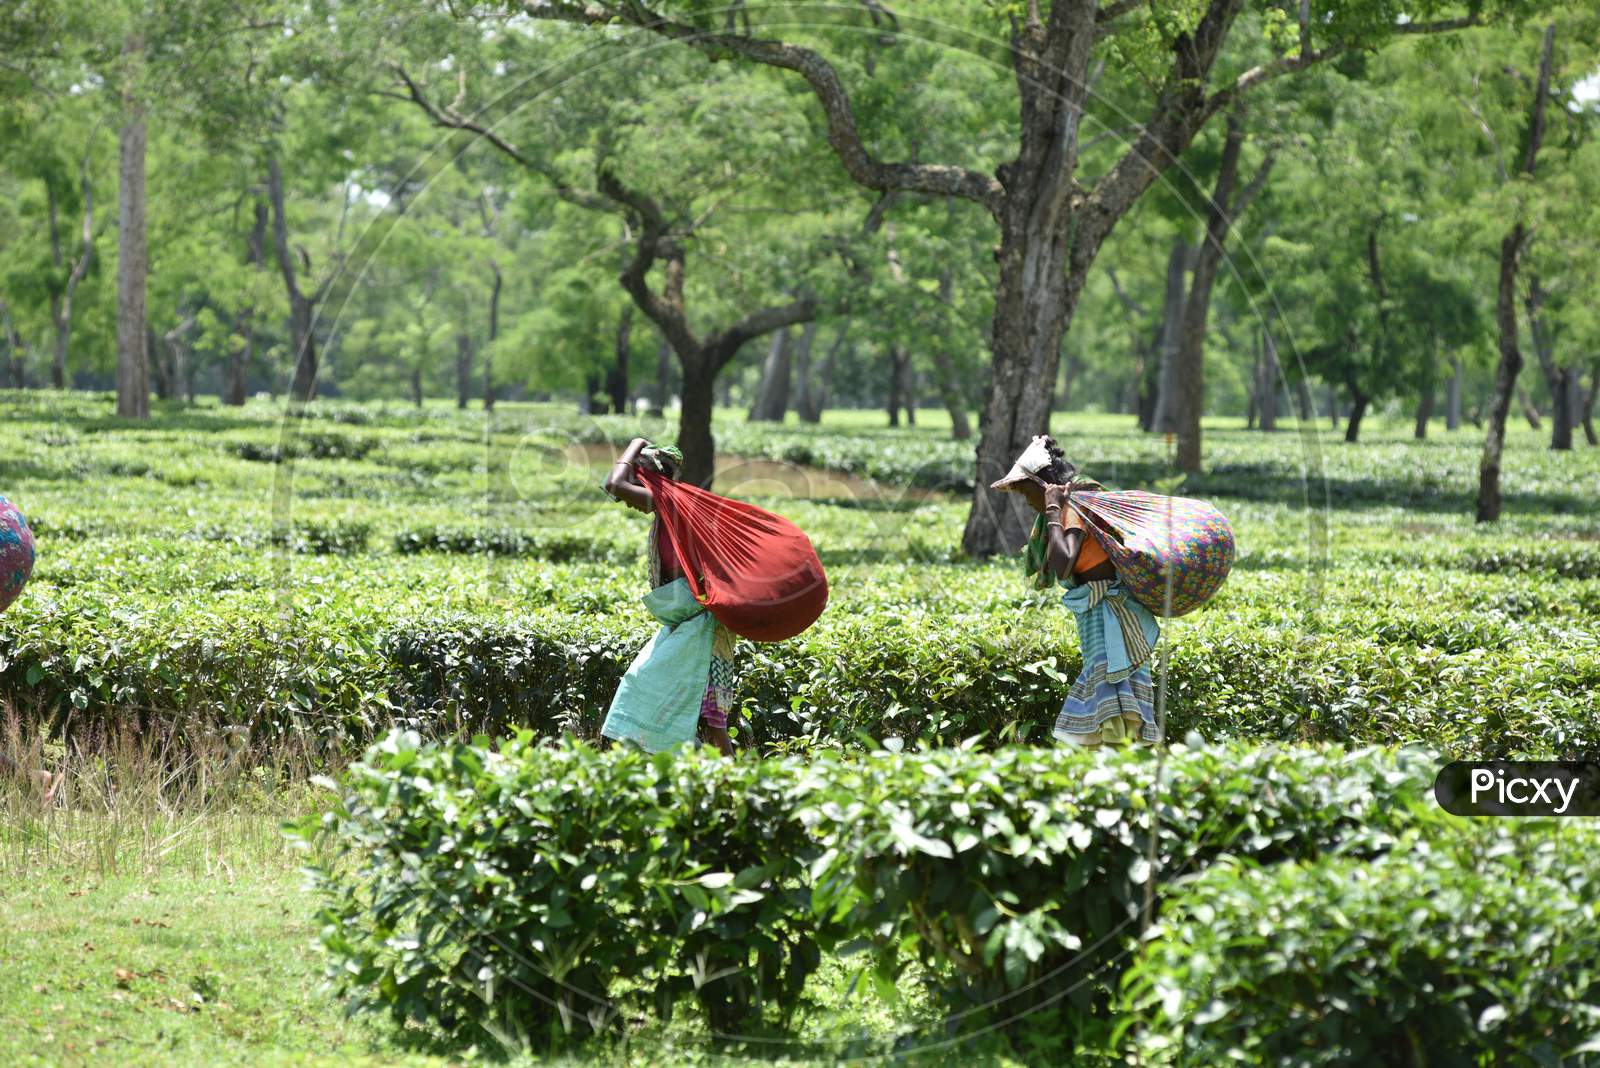 Tea Plantation Workers Collecting Tea Leafs From Gardens In Nagaon, Assam